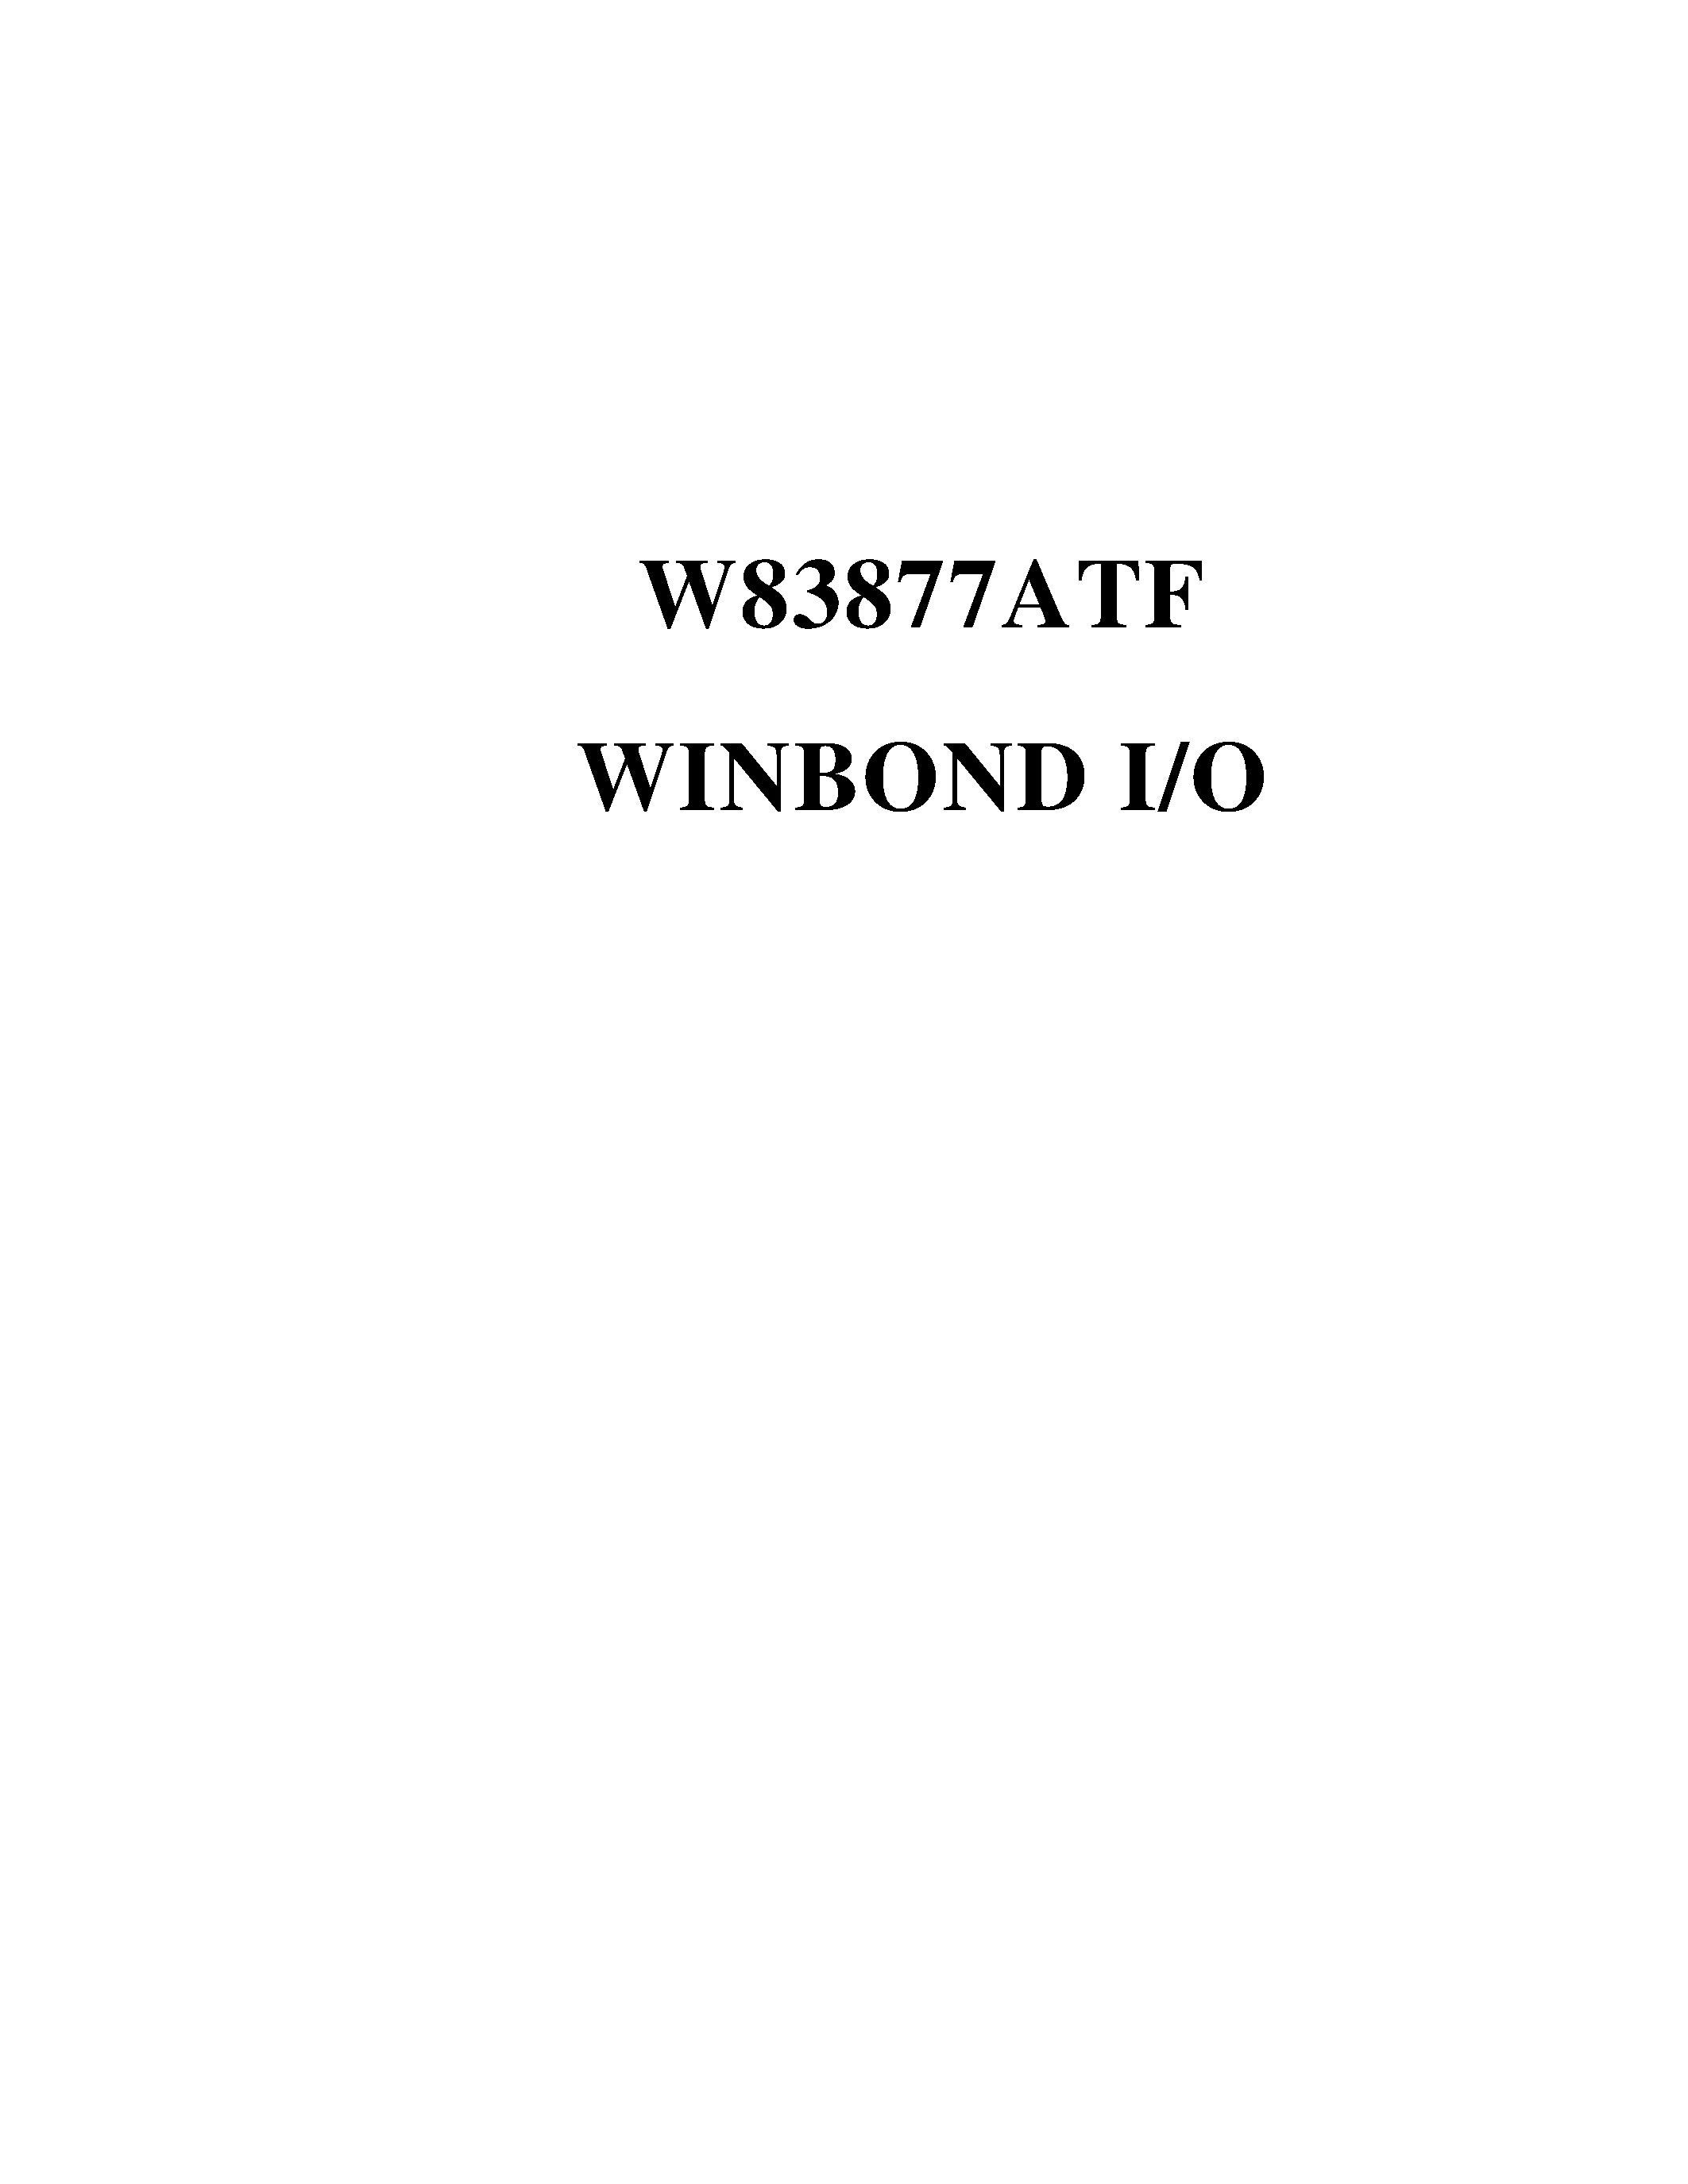 Datasheet W83877ATF - enhanced version from Winbonds most popular I/O chip W83877F page 1